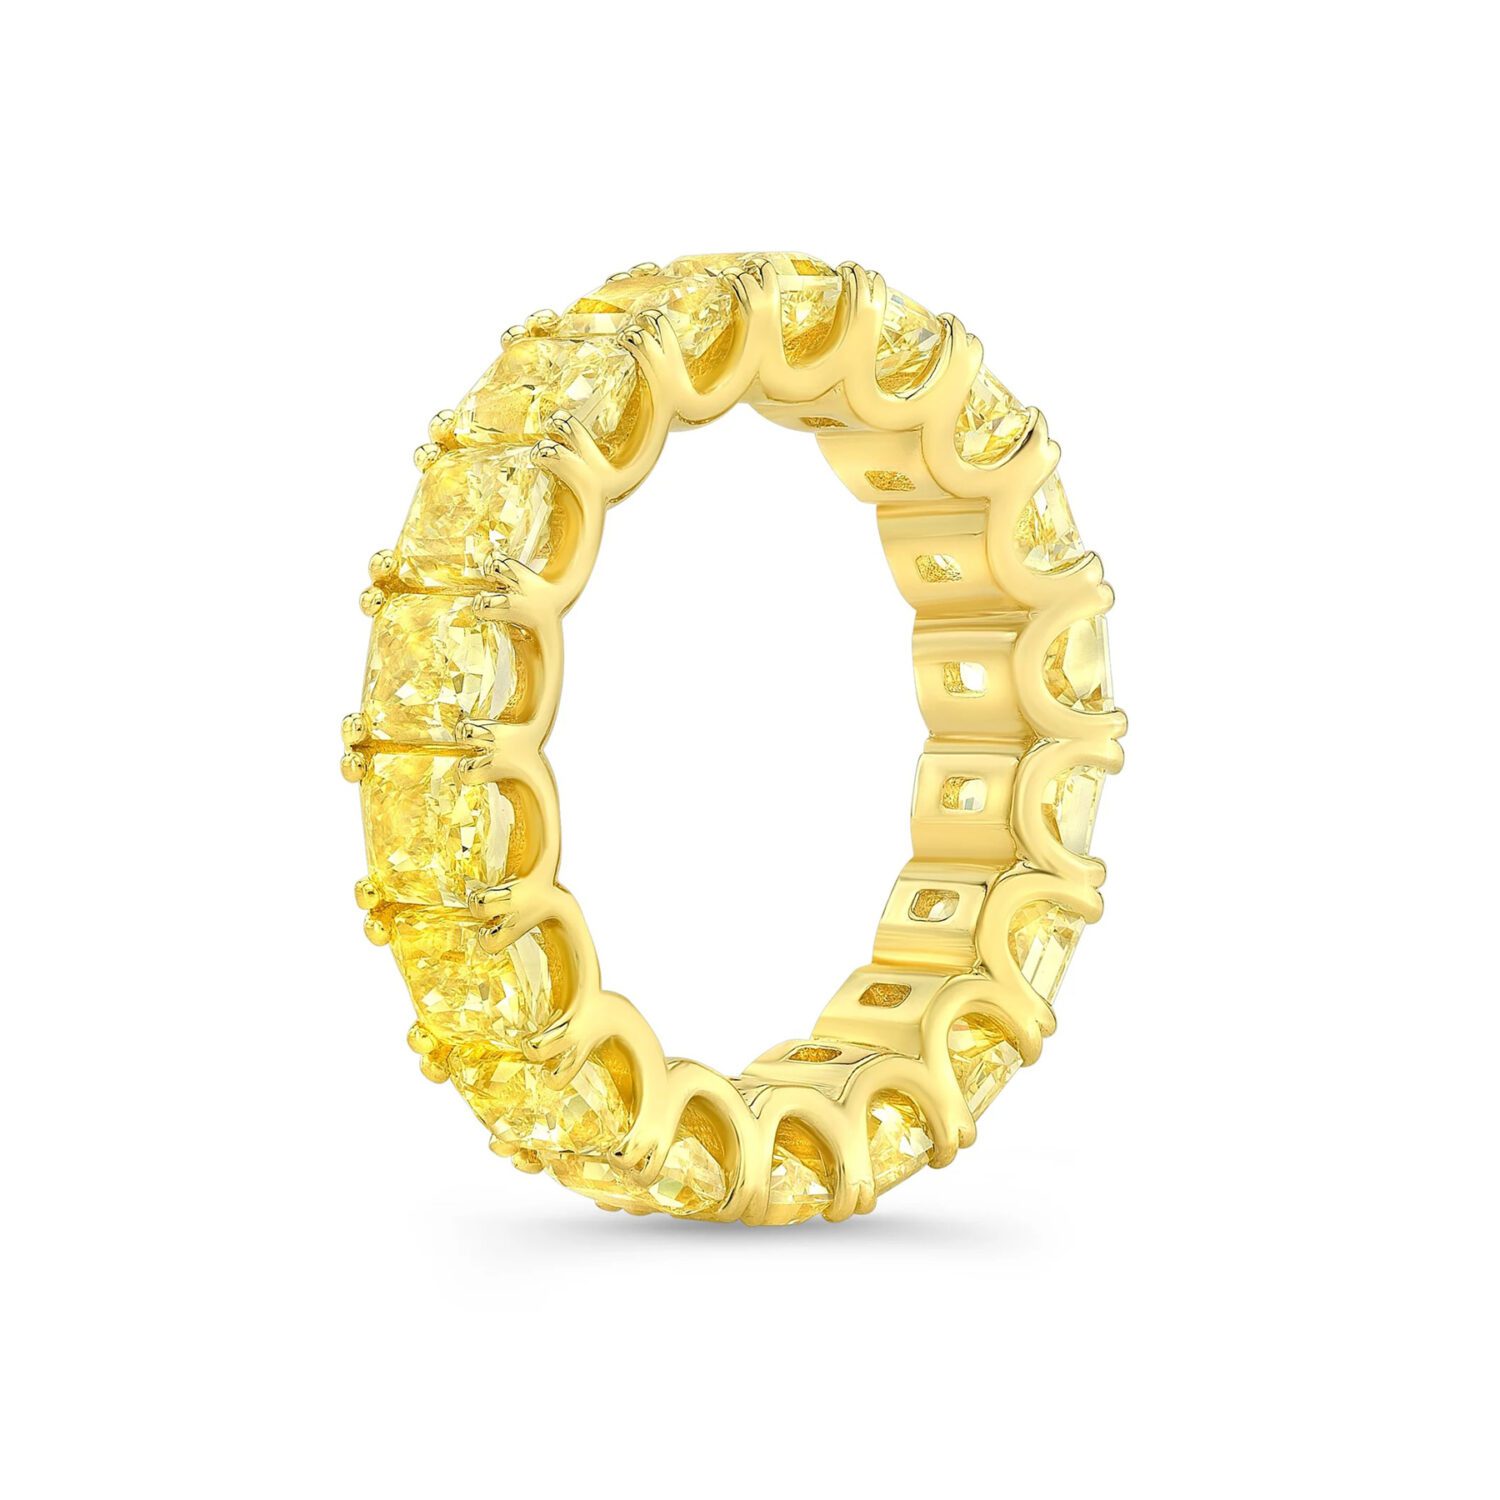 Lab grown diamonds in Cyprus - The Fancy Yellow 6ct Radiant Cut Full Eternity Band Diamond Ring best quality and price